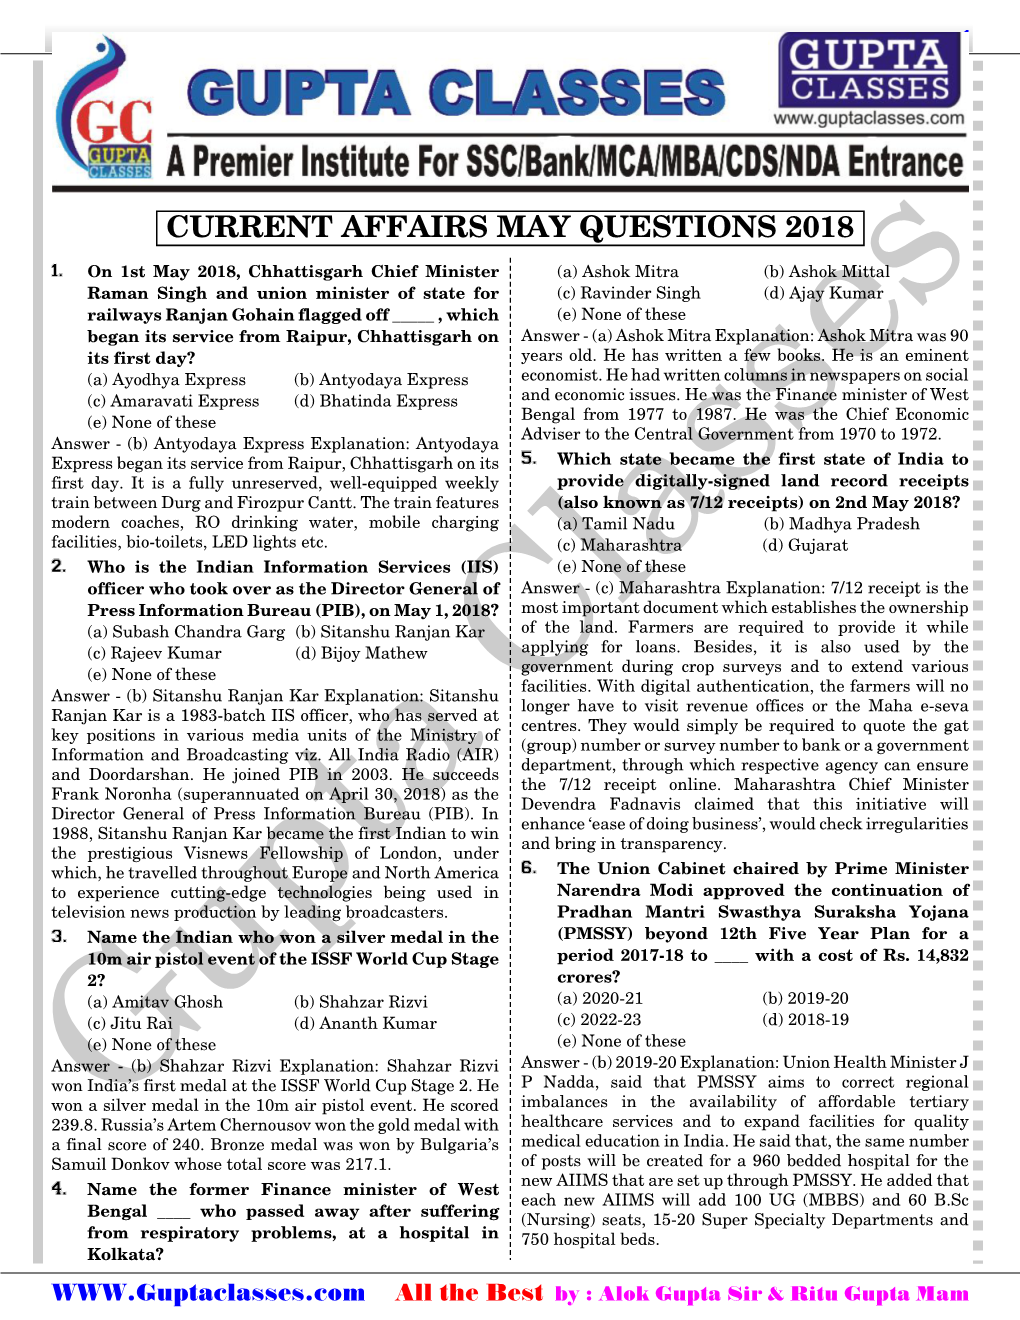 Current Affairs May Questions 2018